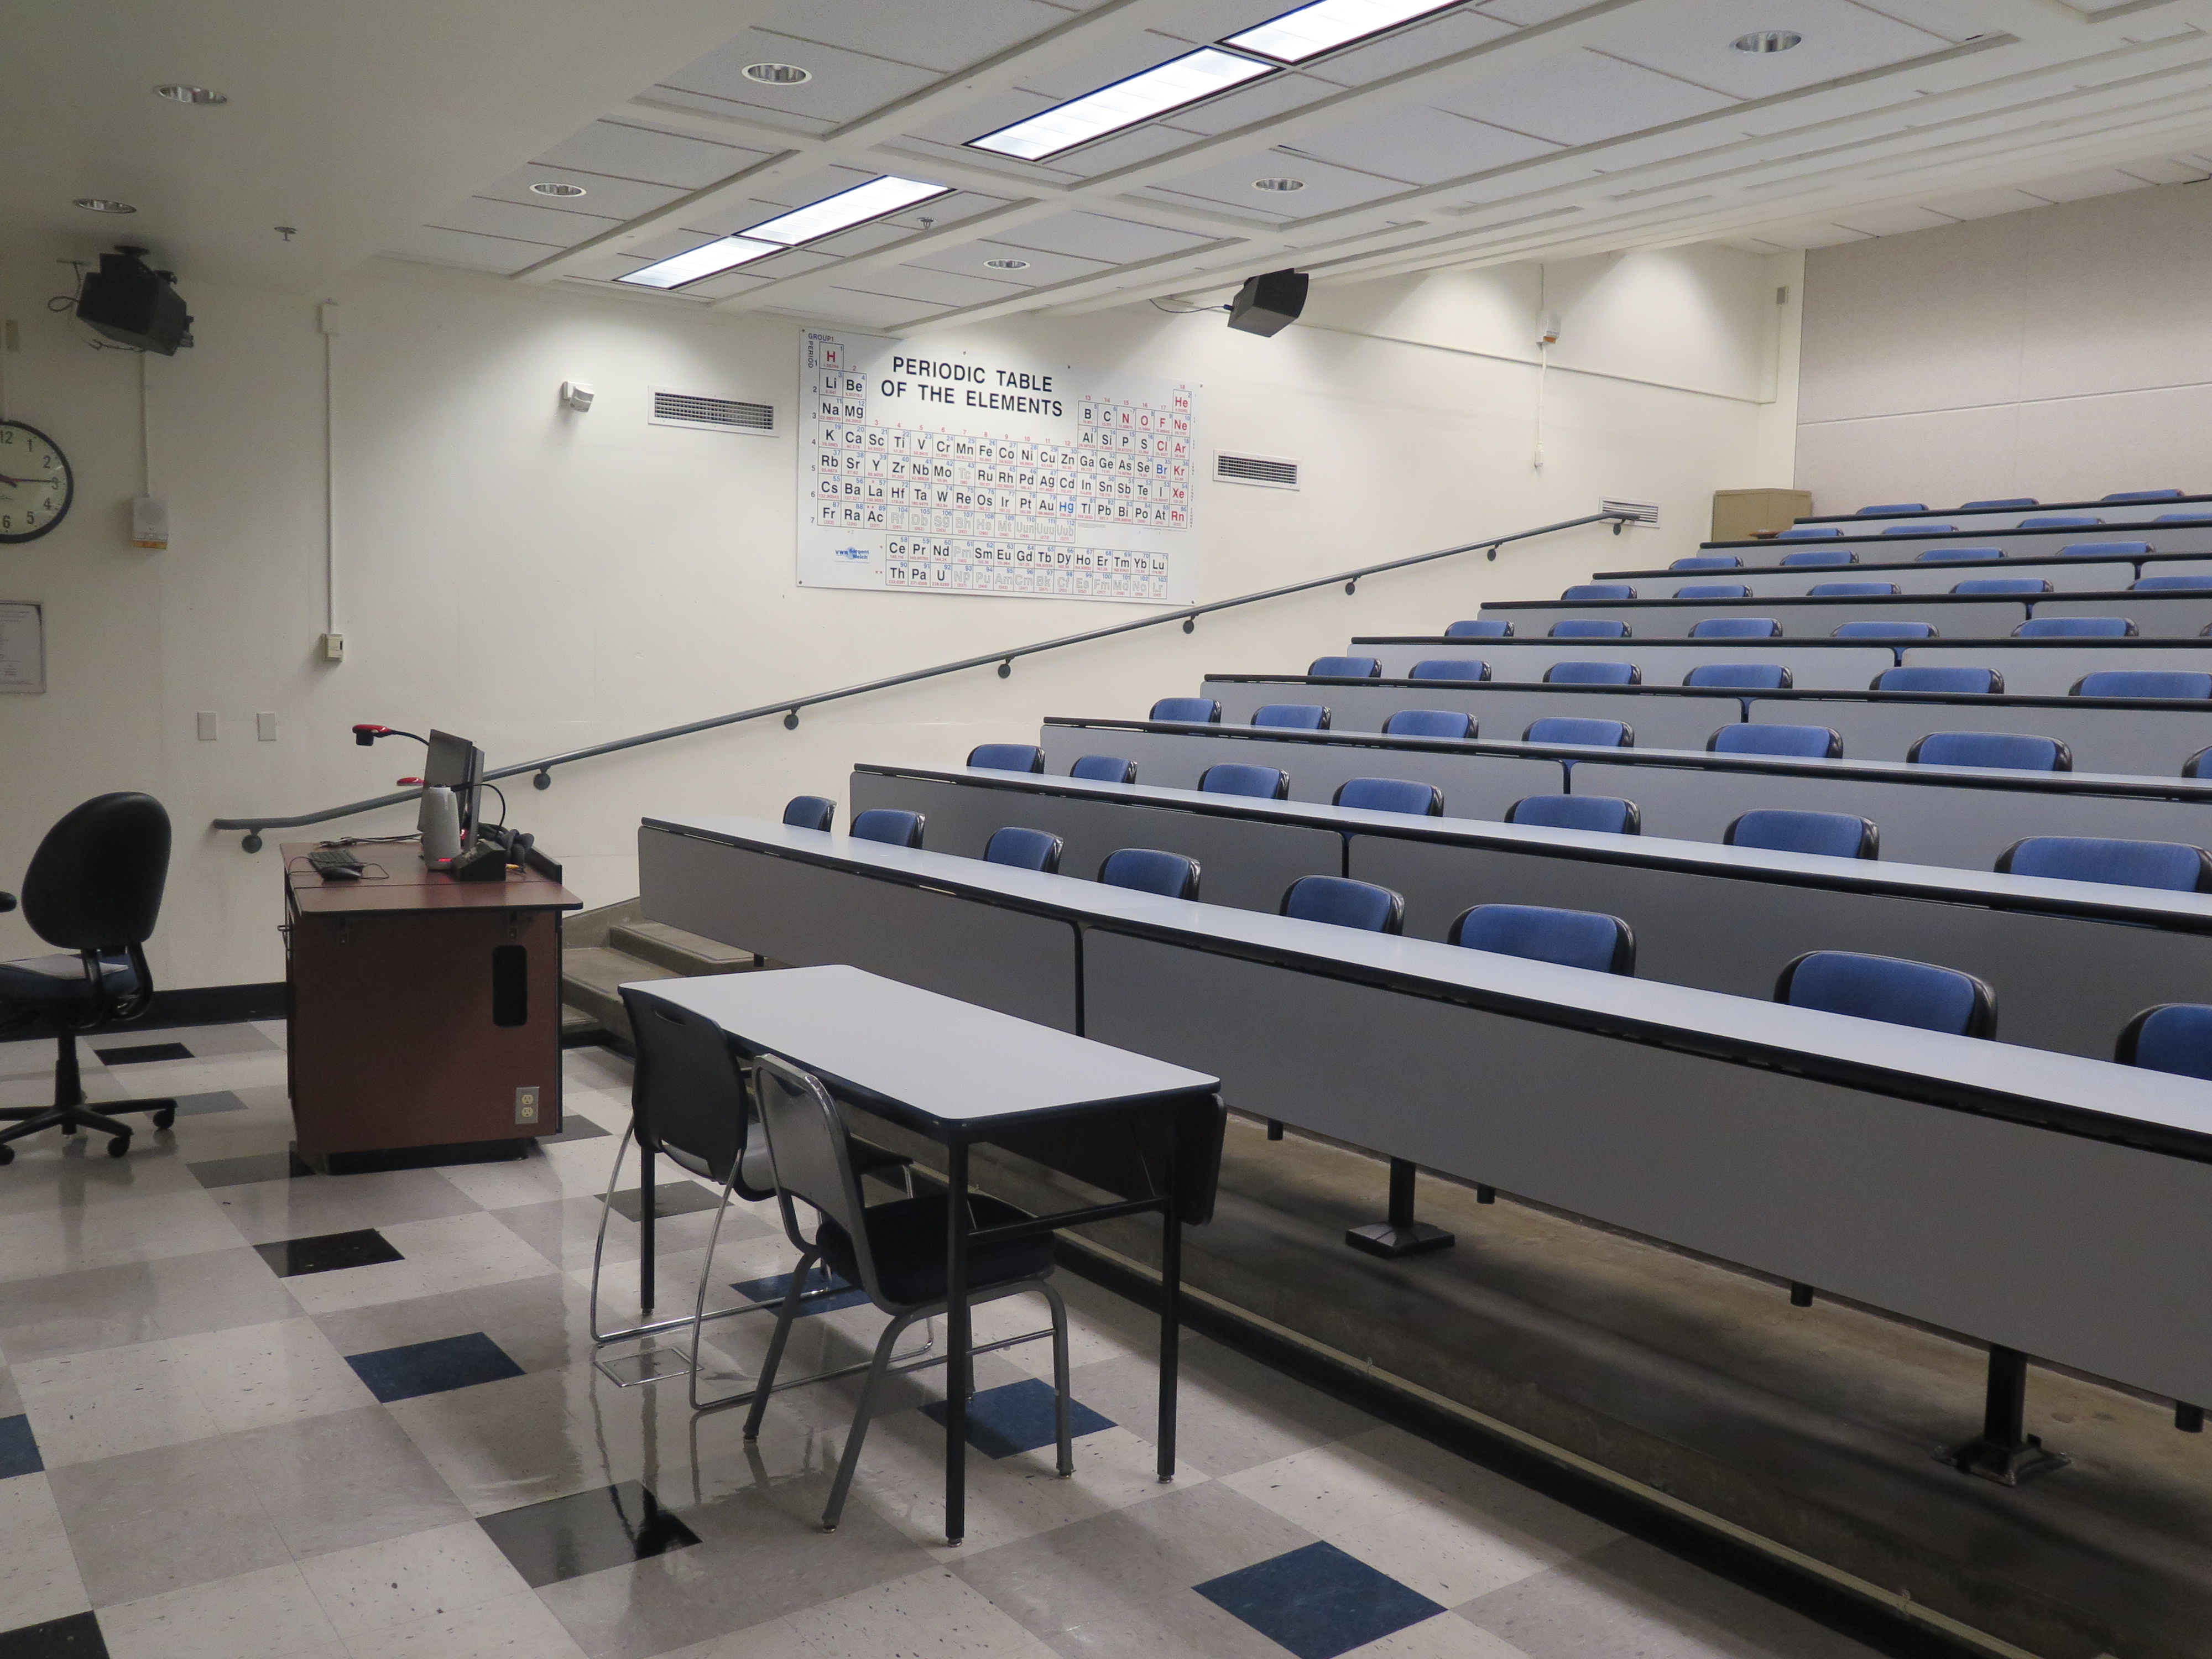 Room Consists of hard floors, Stationary rows of tables and chairs, a white board and podium are both located at the front of the room. this room also uses a Rear Screen projector, it is the large Gray surface next to the white board